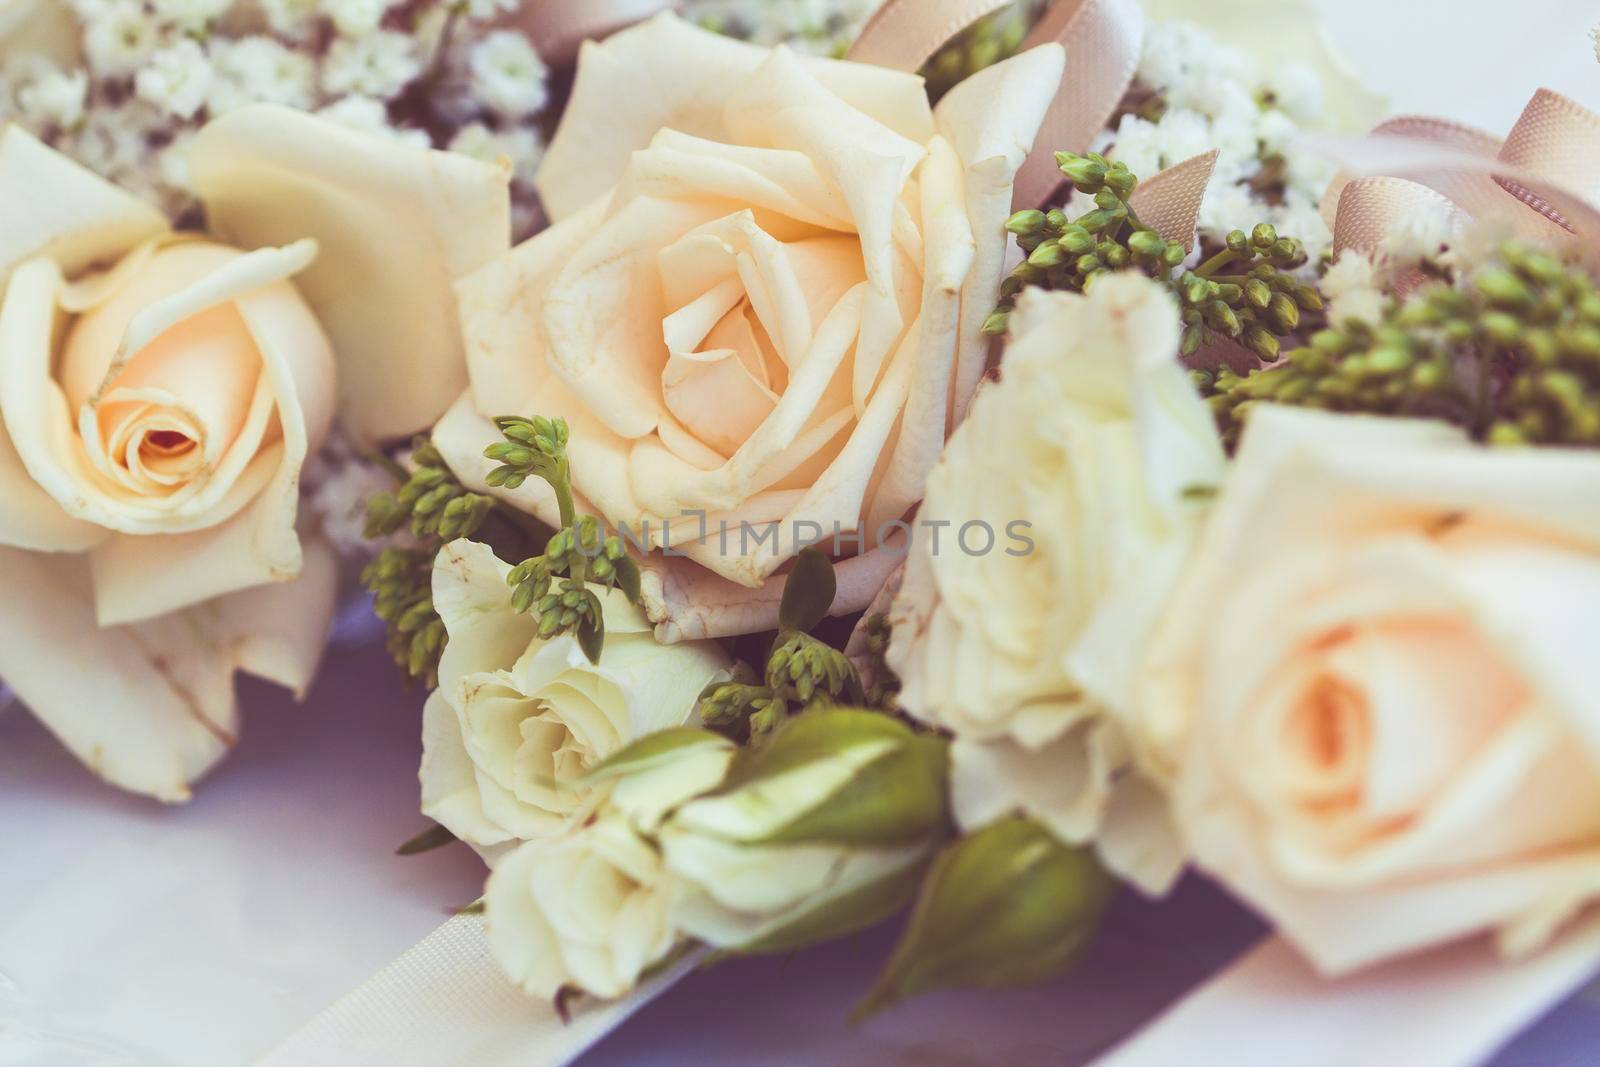 Bouquet of roses and flowers used for a wedding by contas